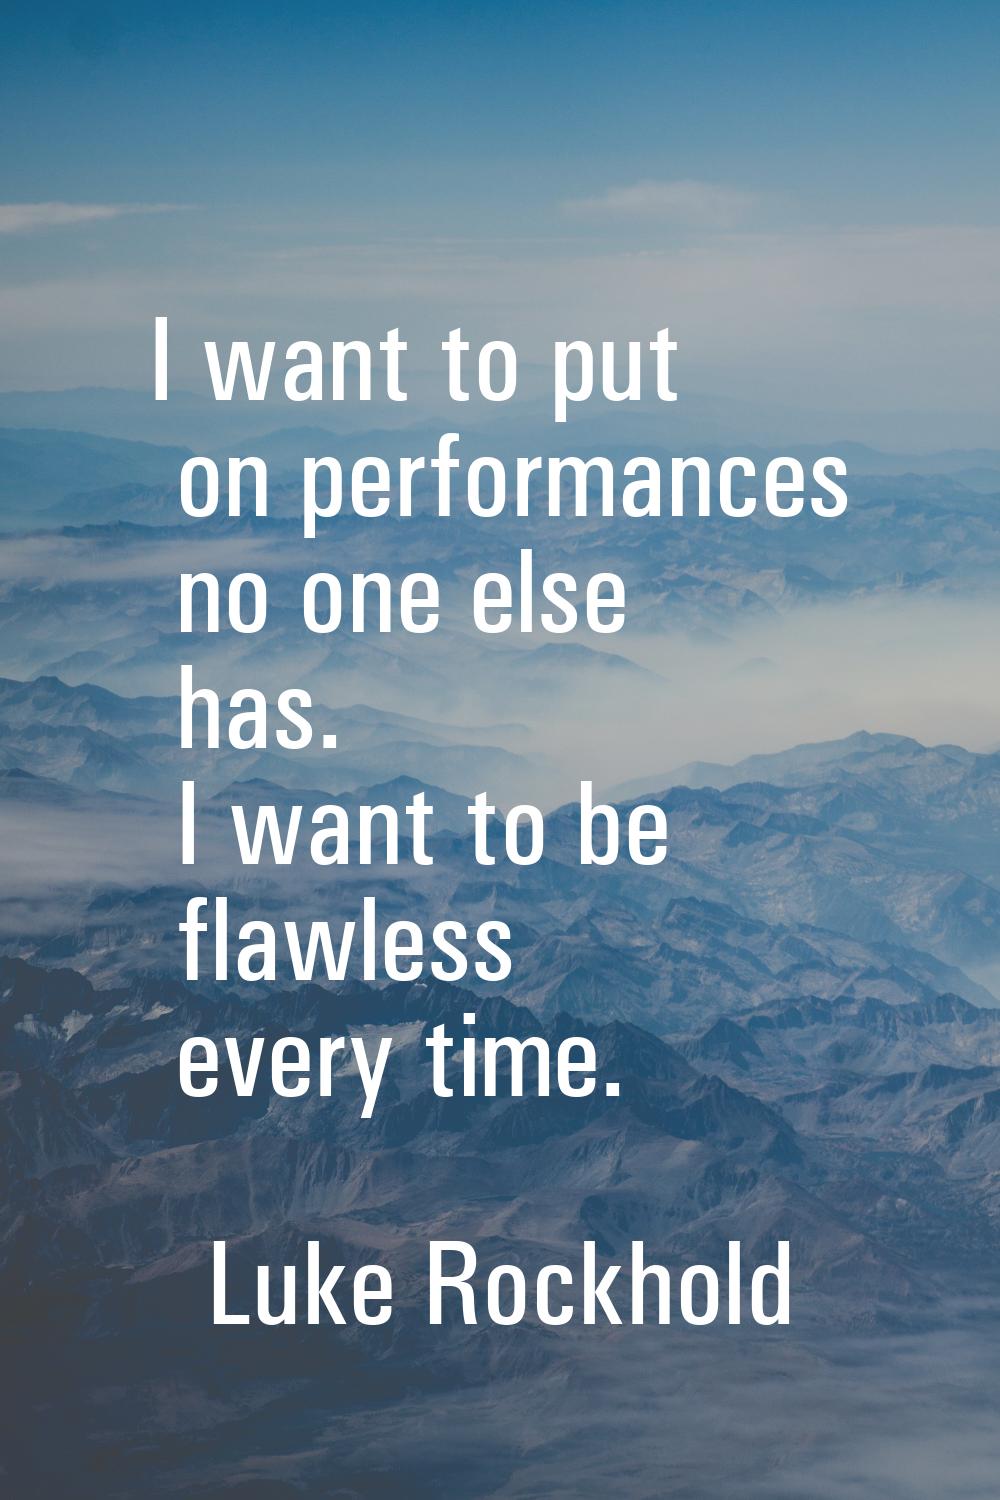 I want to put on performances no one else has. I want to be flawless every time.